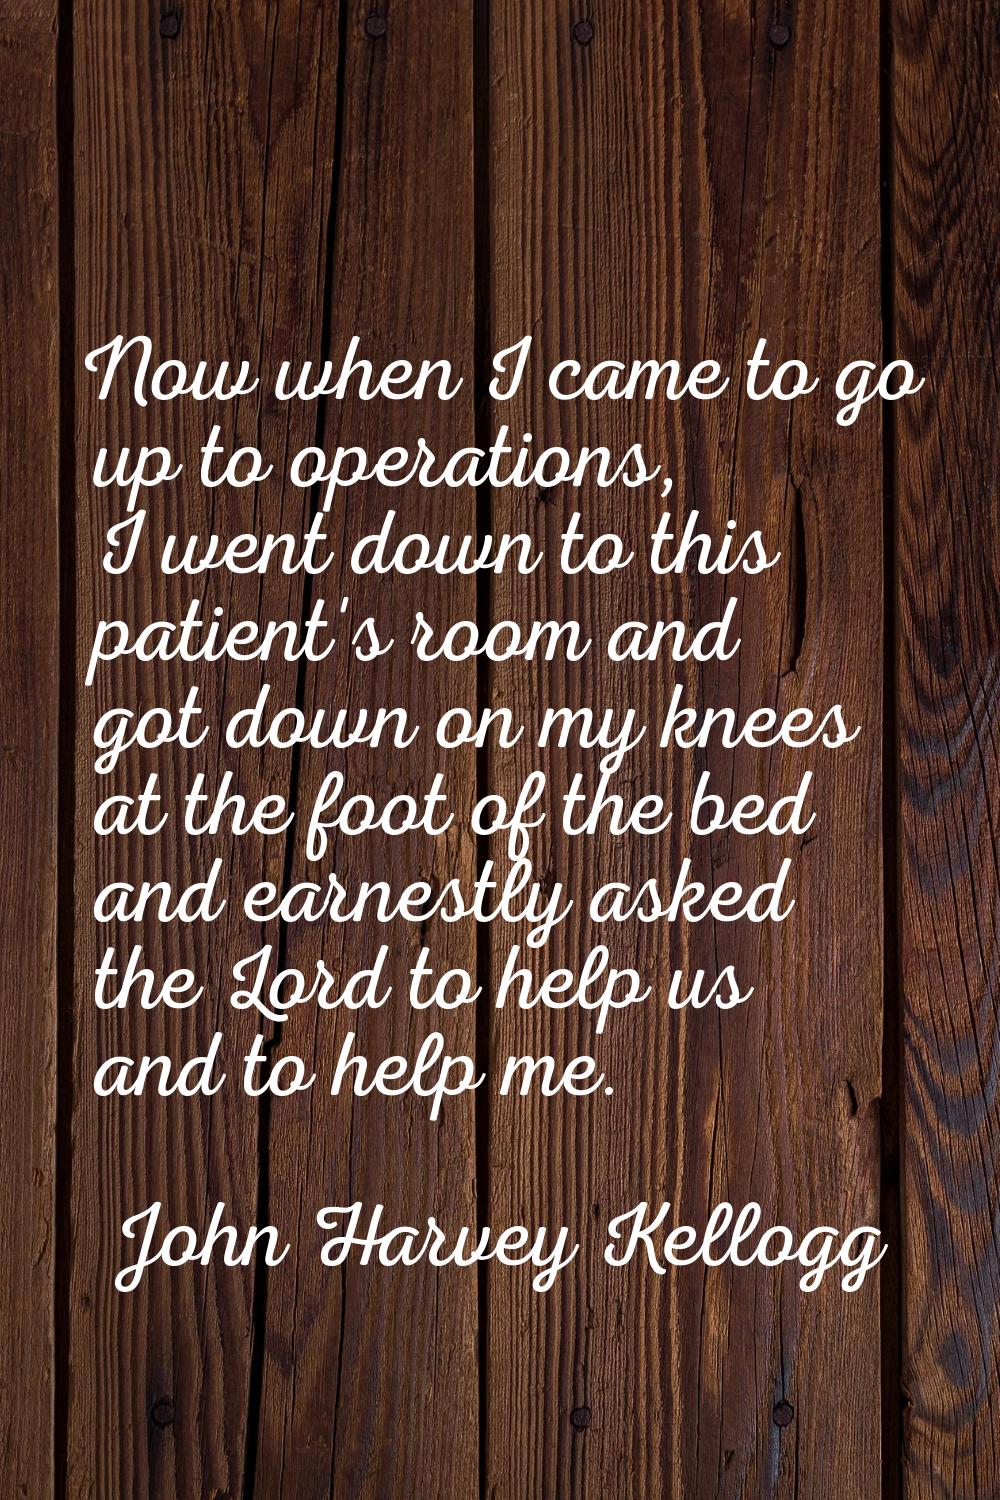 Now when I came to go up to operations, I went down to this patient's room and got down on my knees